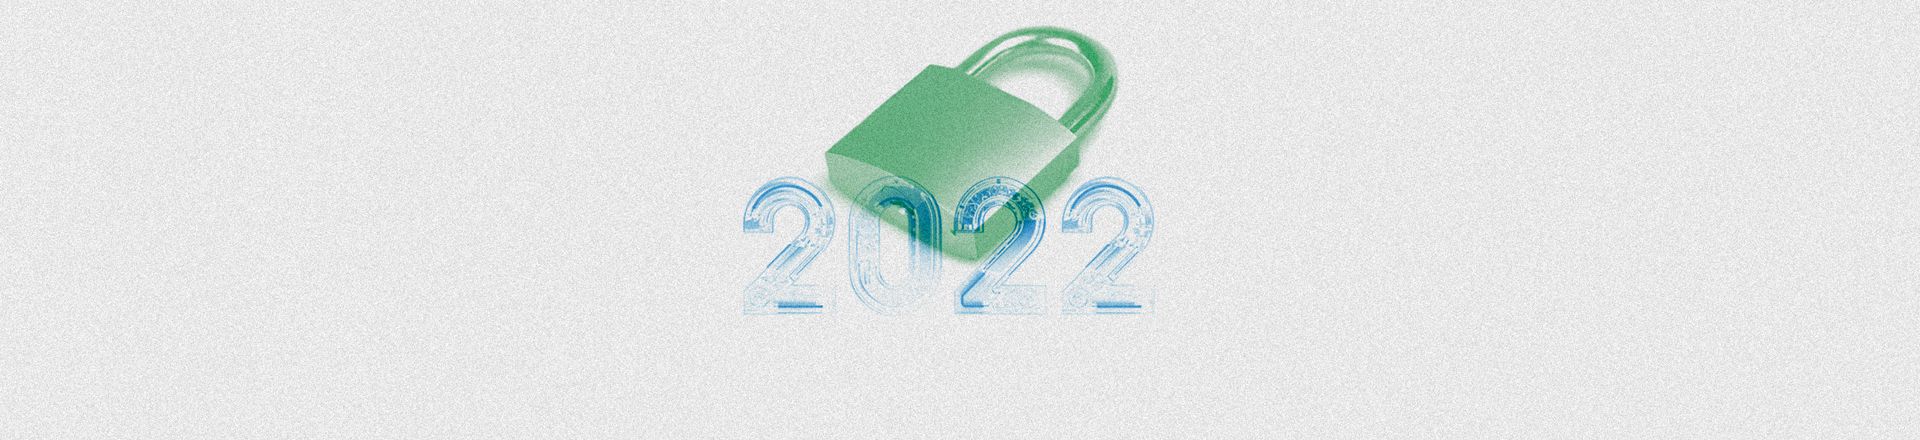 This is the 1 Thing Every Security Team Needs Before 2022